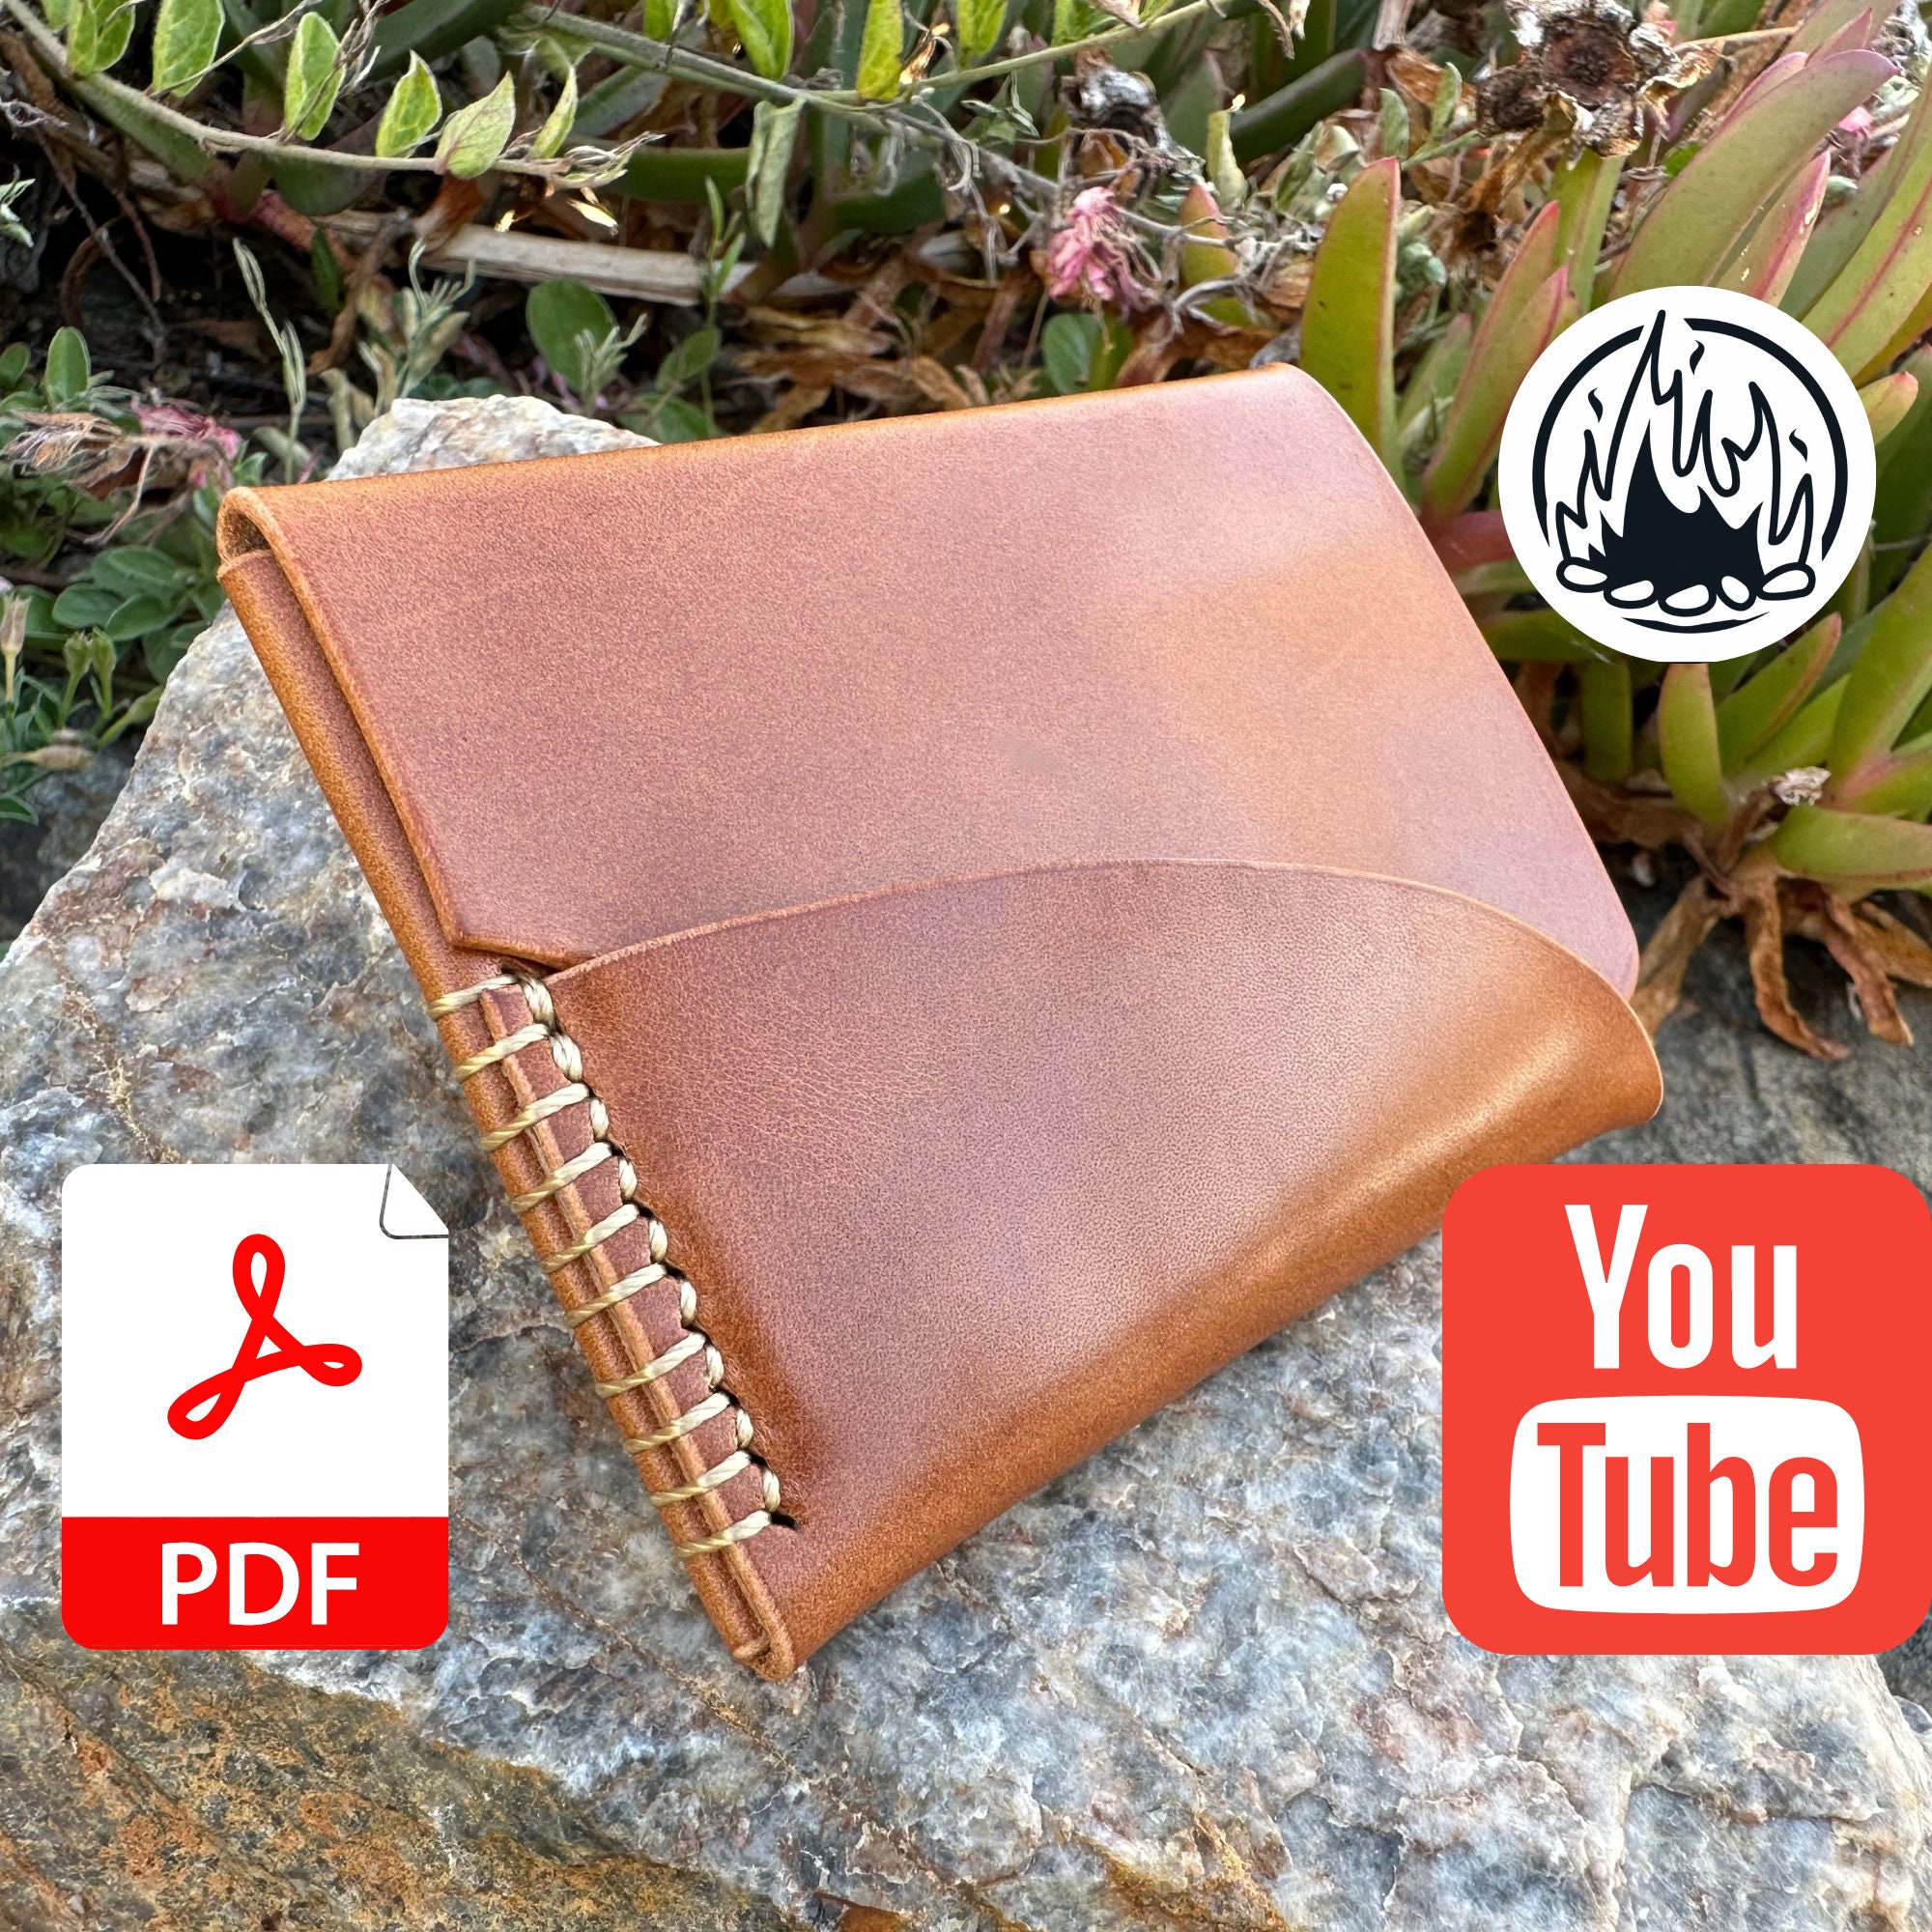 DIY Leather Wallets Kit DIY PinkRed Eco Leather Projects DIY